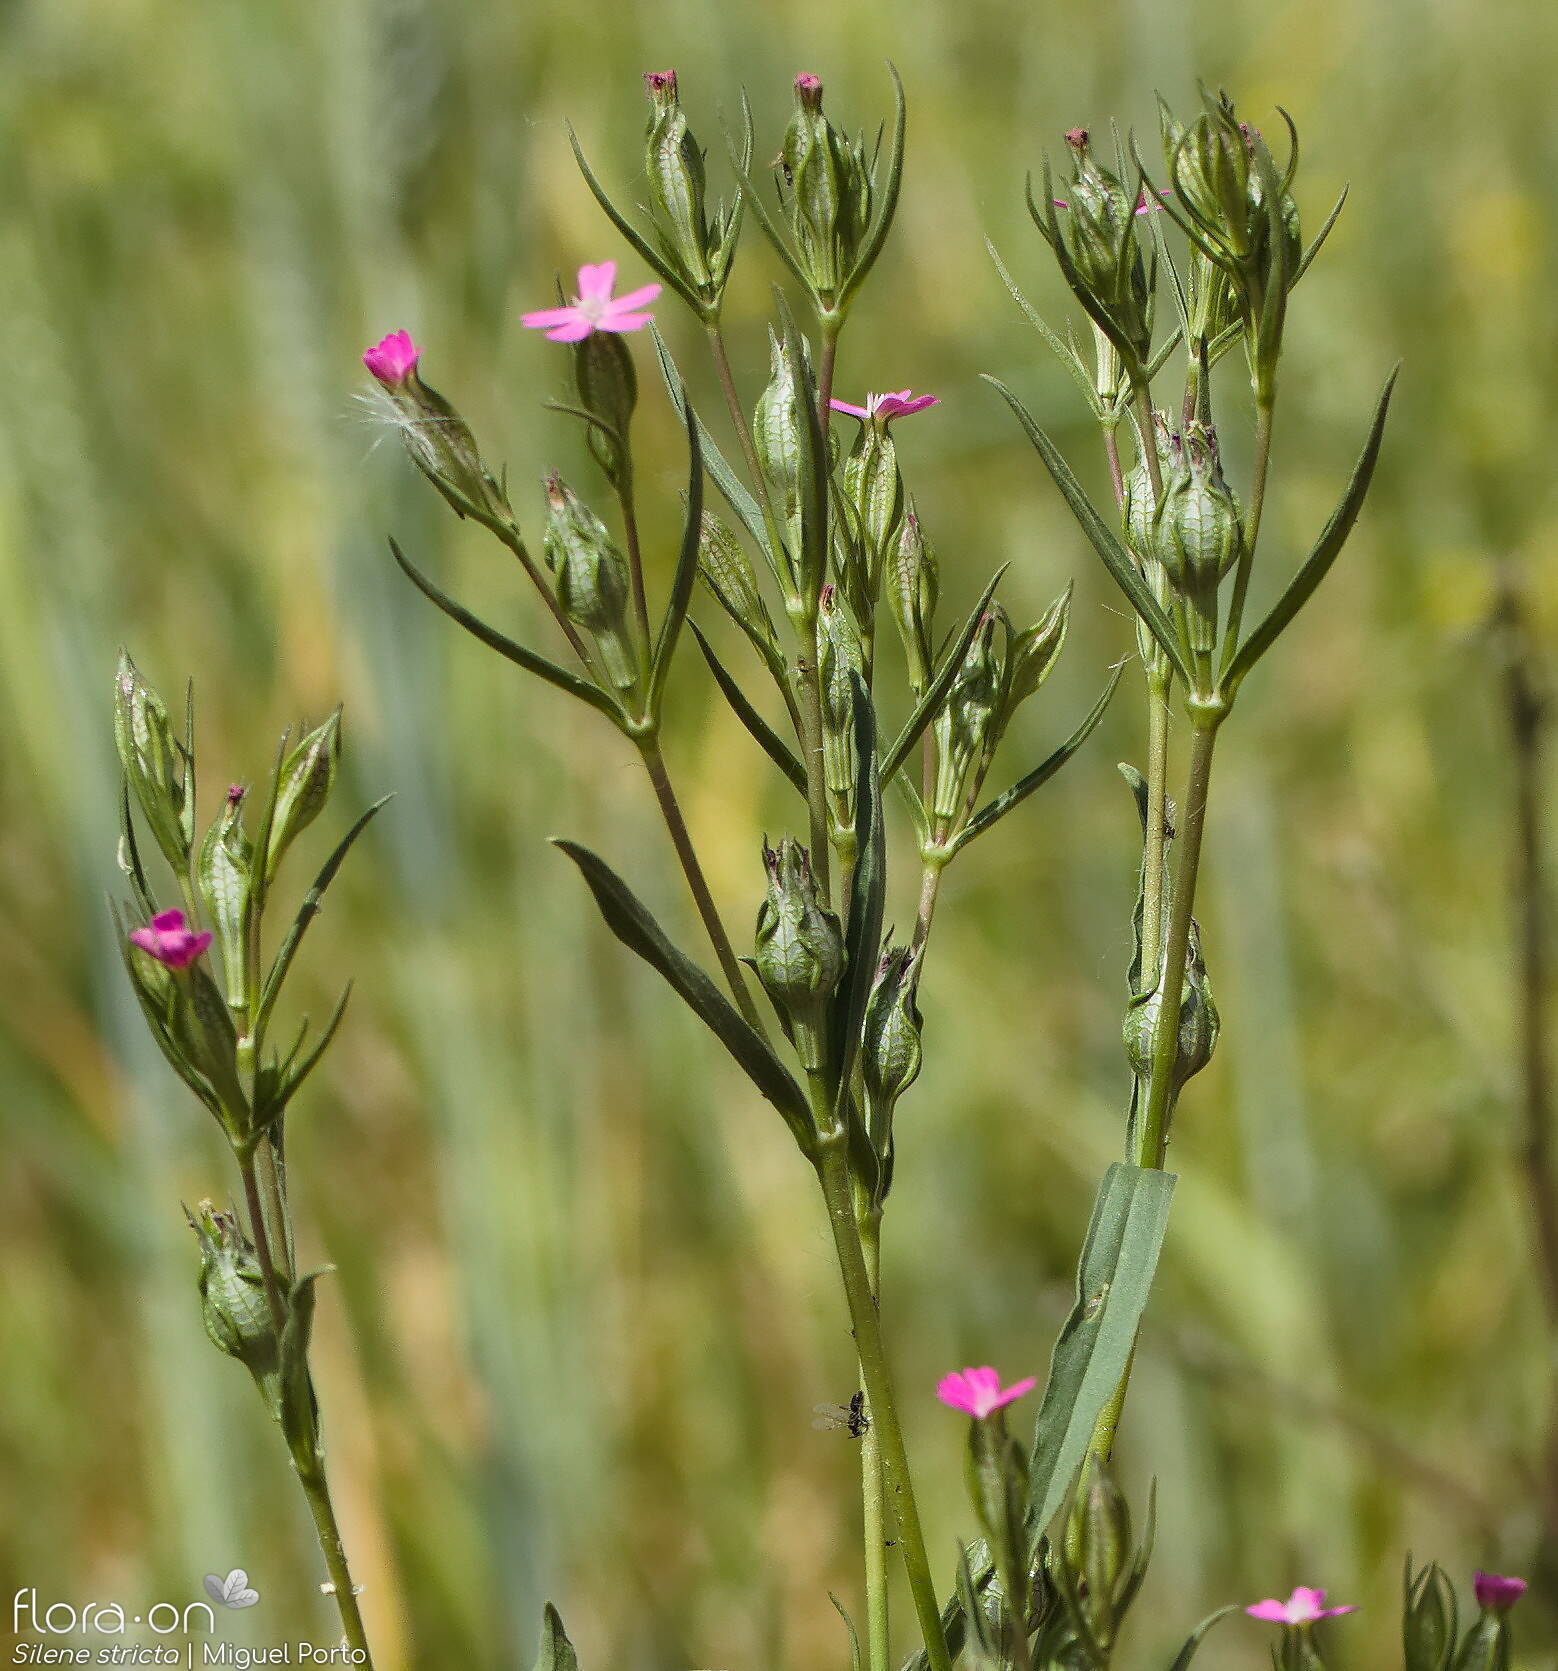 Silene stricta - Flor (geral) | Miguel Porto; CC BY-NC 4.0